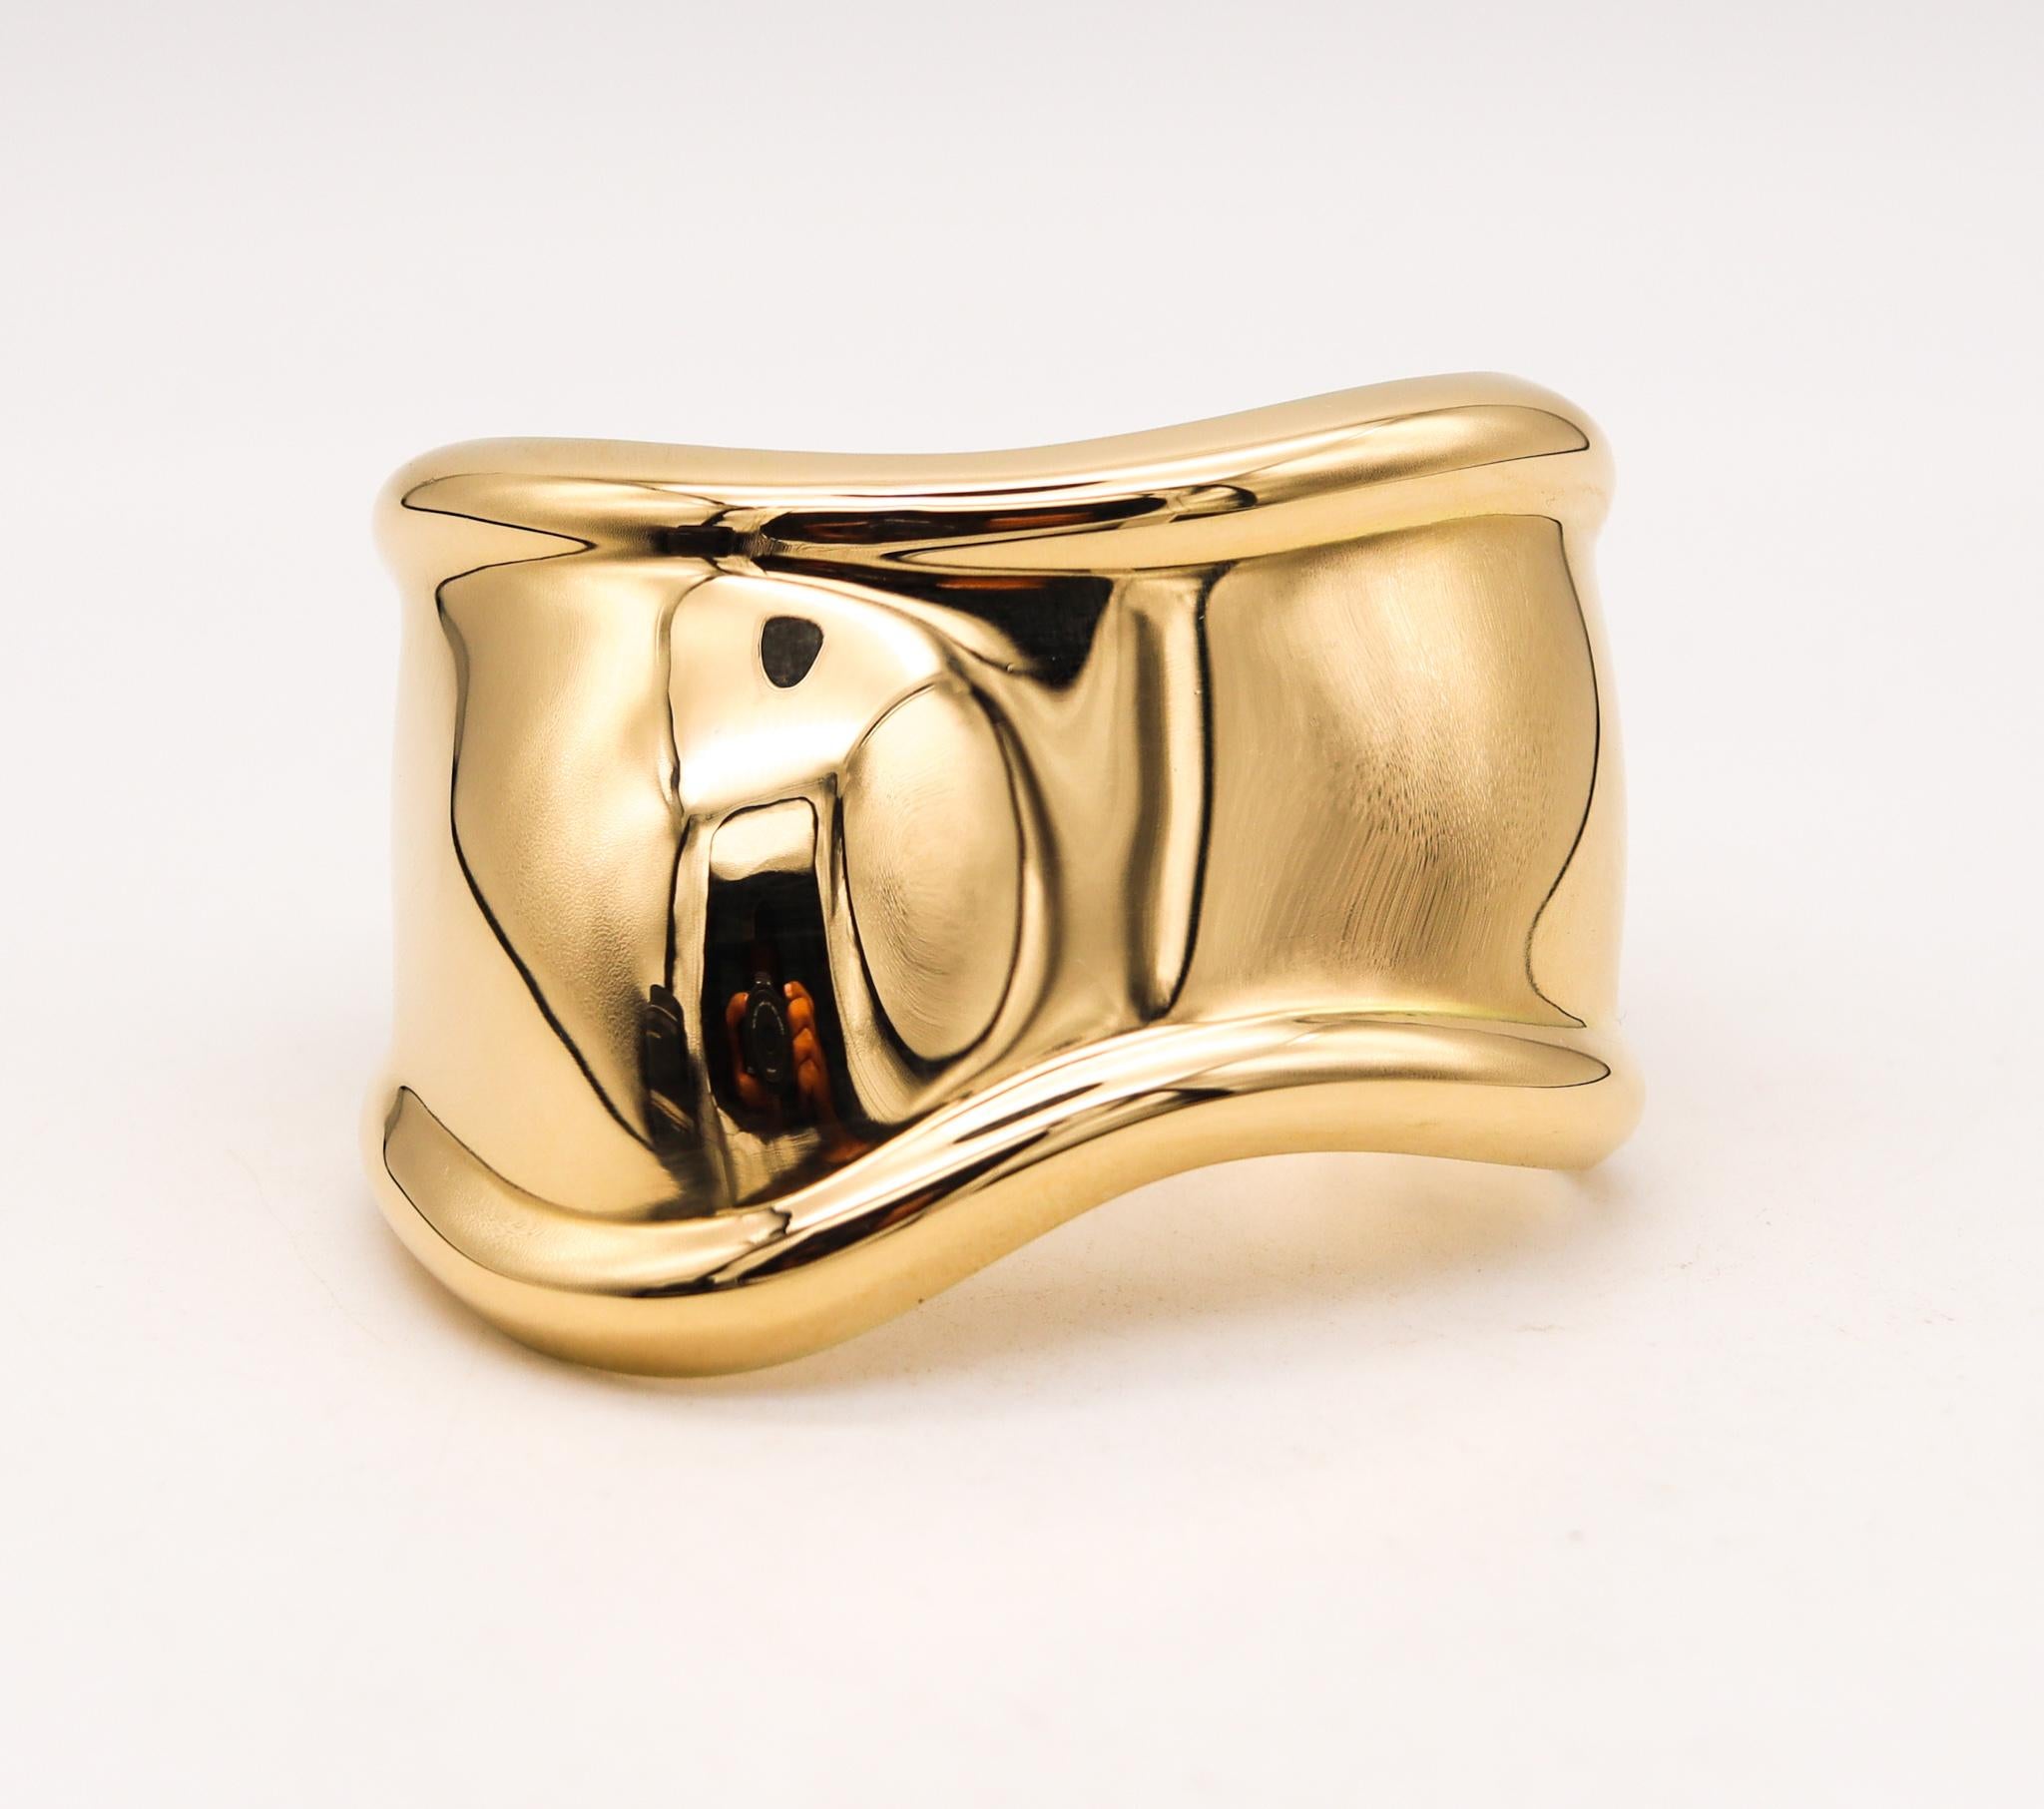 Small right bone cuff designed by Elsa Peretti (1940-2021) for Tiffany & Co.

This sculptural cuff is one of the most iconic designs, created by Peretti for the Tiffany studios and from the 20th century. This open side cuff model was originally